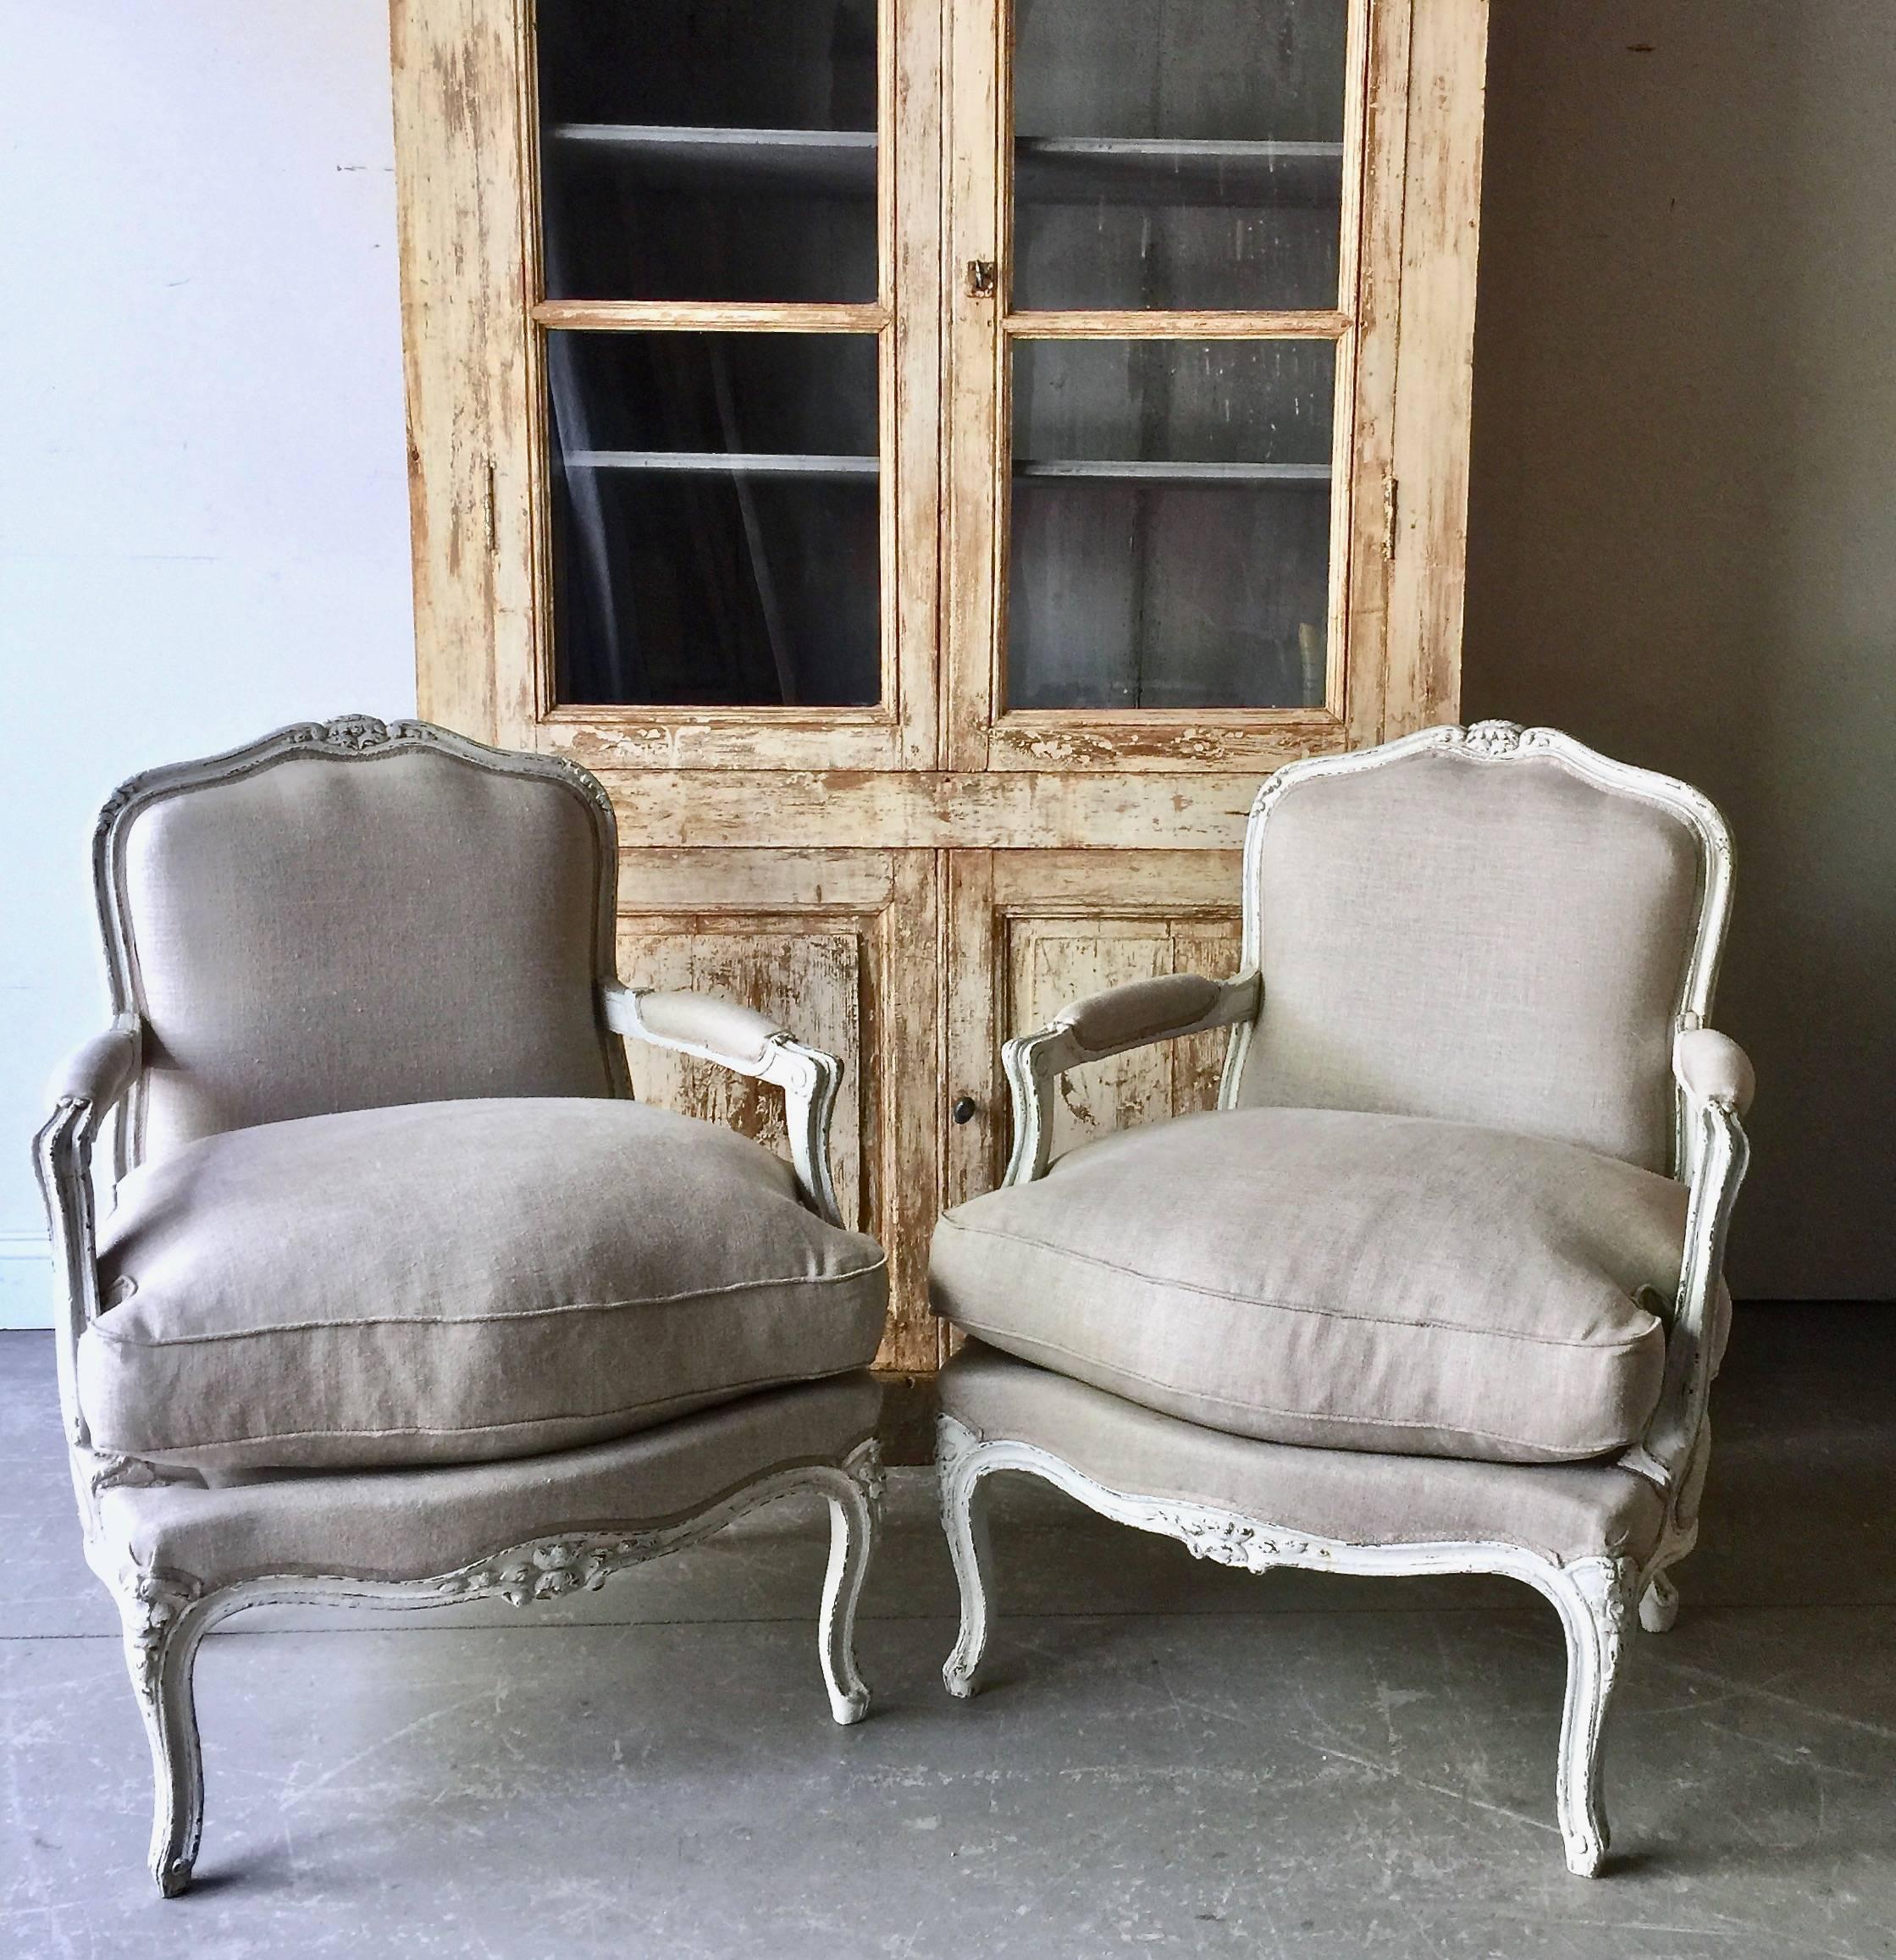 A pair of French painted fauteuils in Louis XV style with elegant carved floral details on shaped back rail, knees and aprons. Upholstered in neutral color linens with down/feather filled cussion and the classic gimp trim.
France, circa 1900.
Here